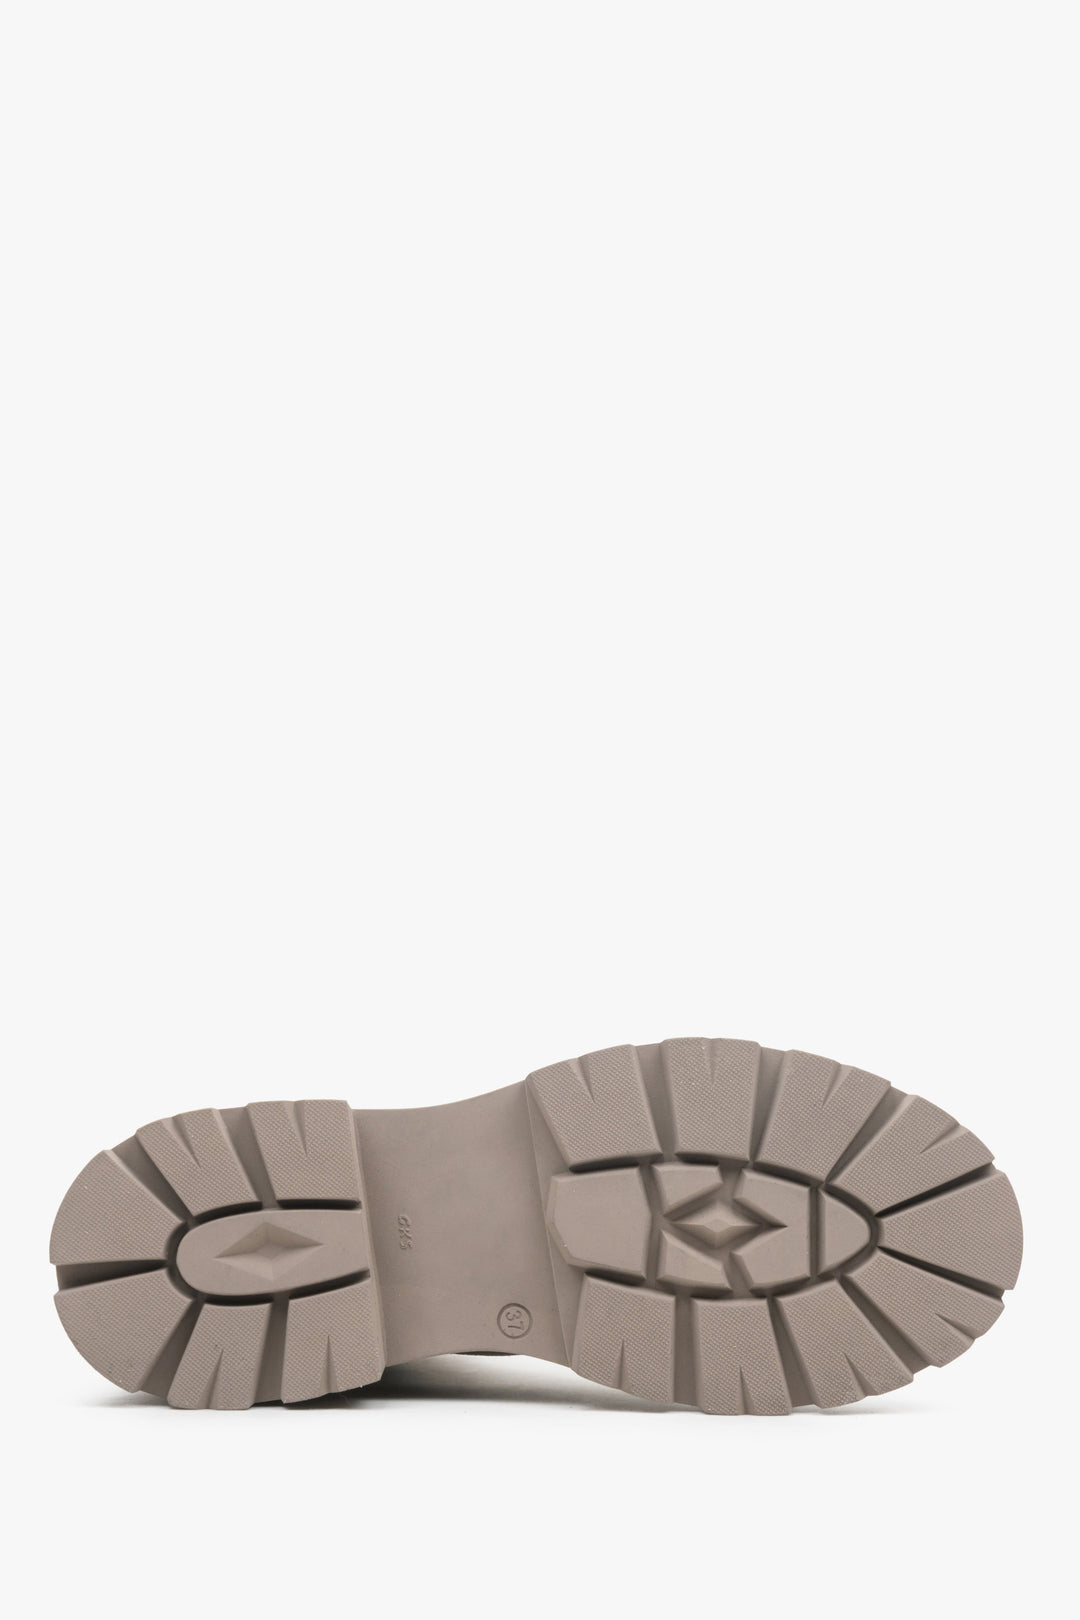 Light grey women's winter boots - a close-up on a shoe sole.